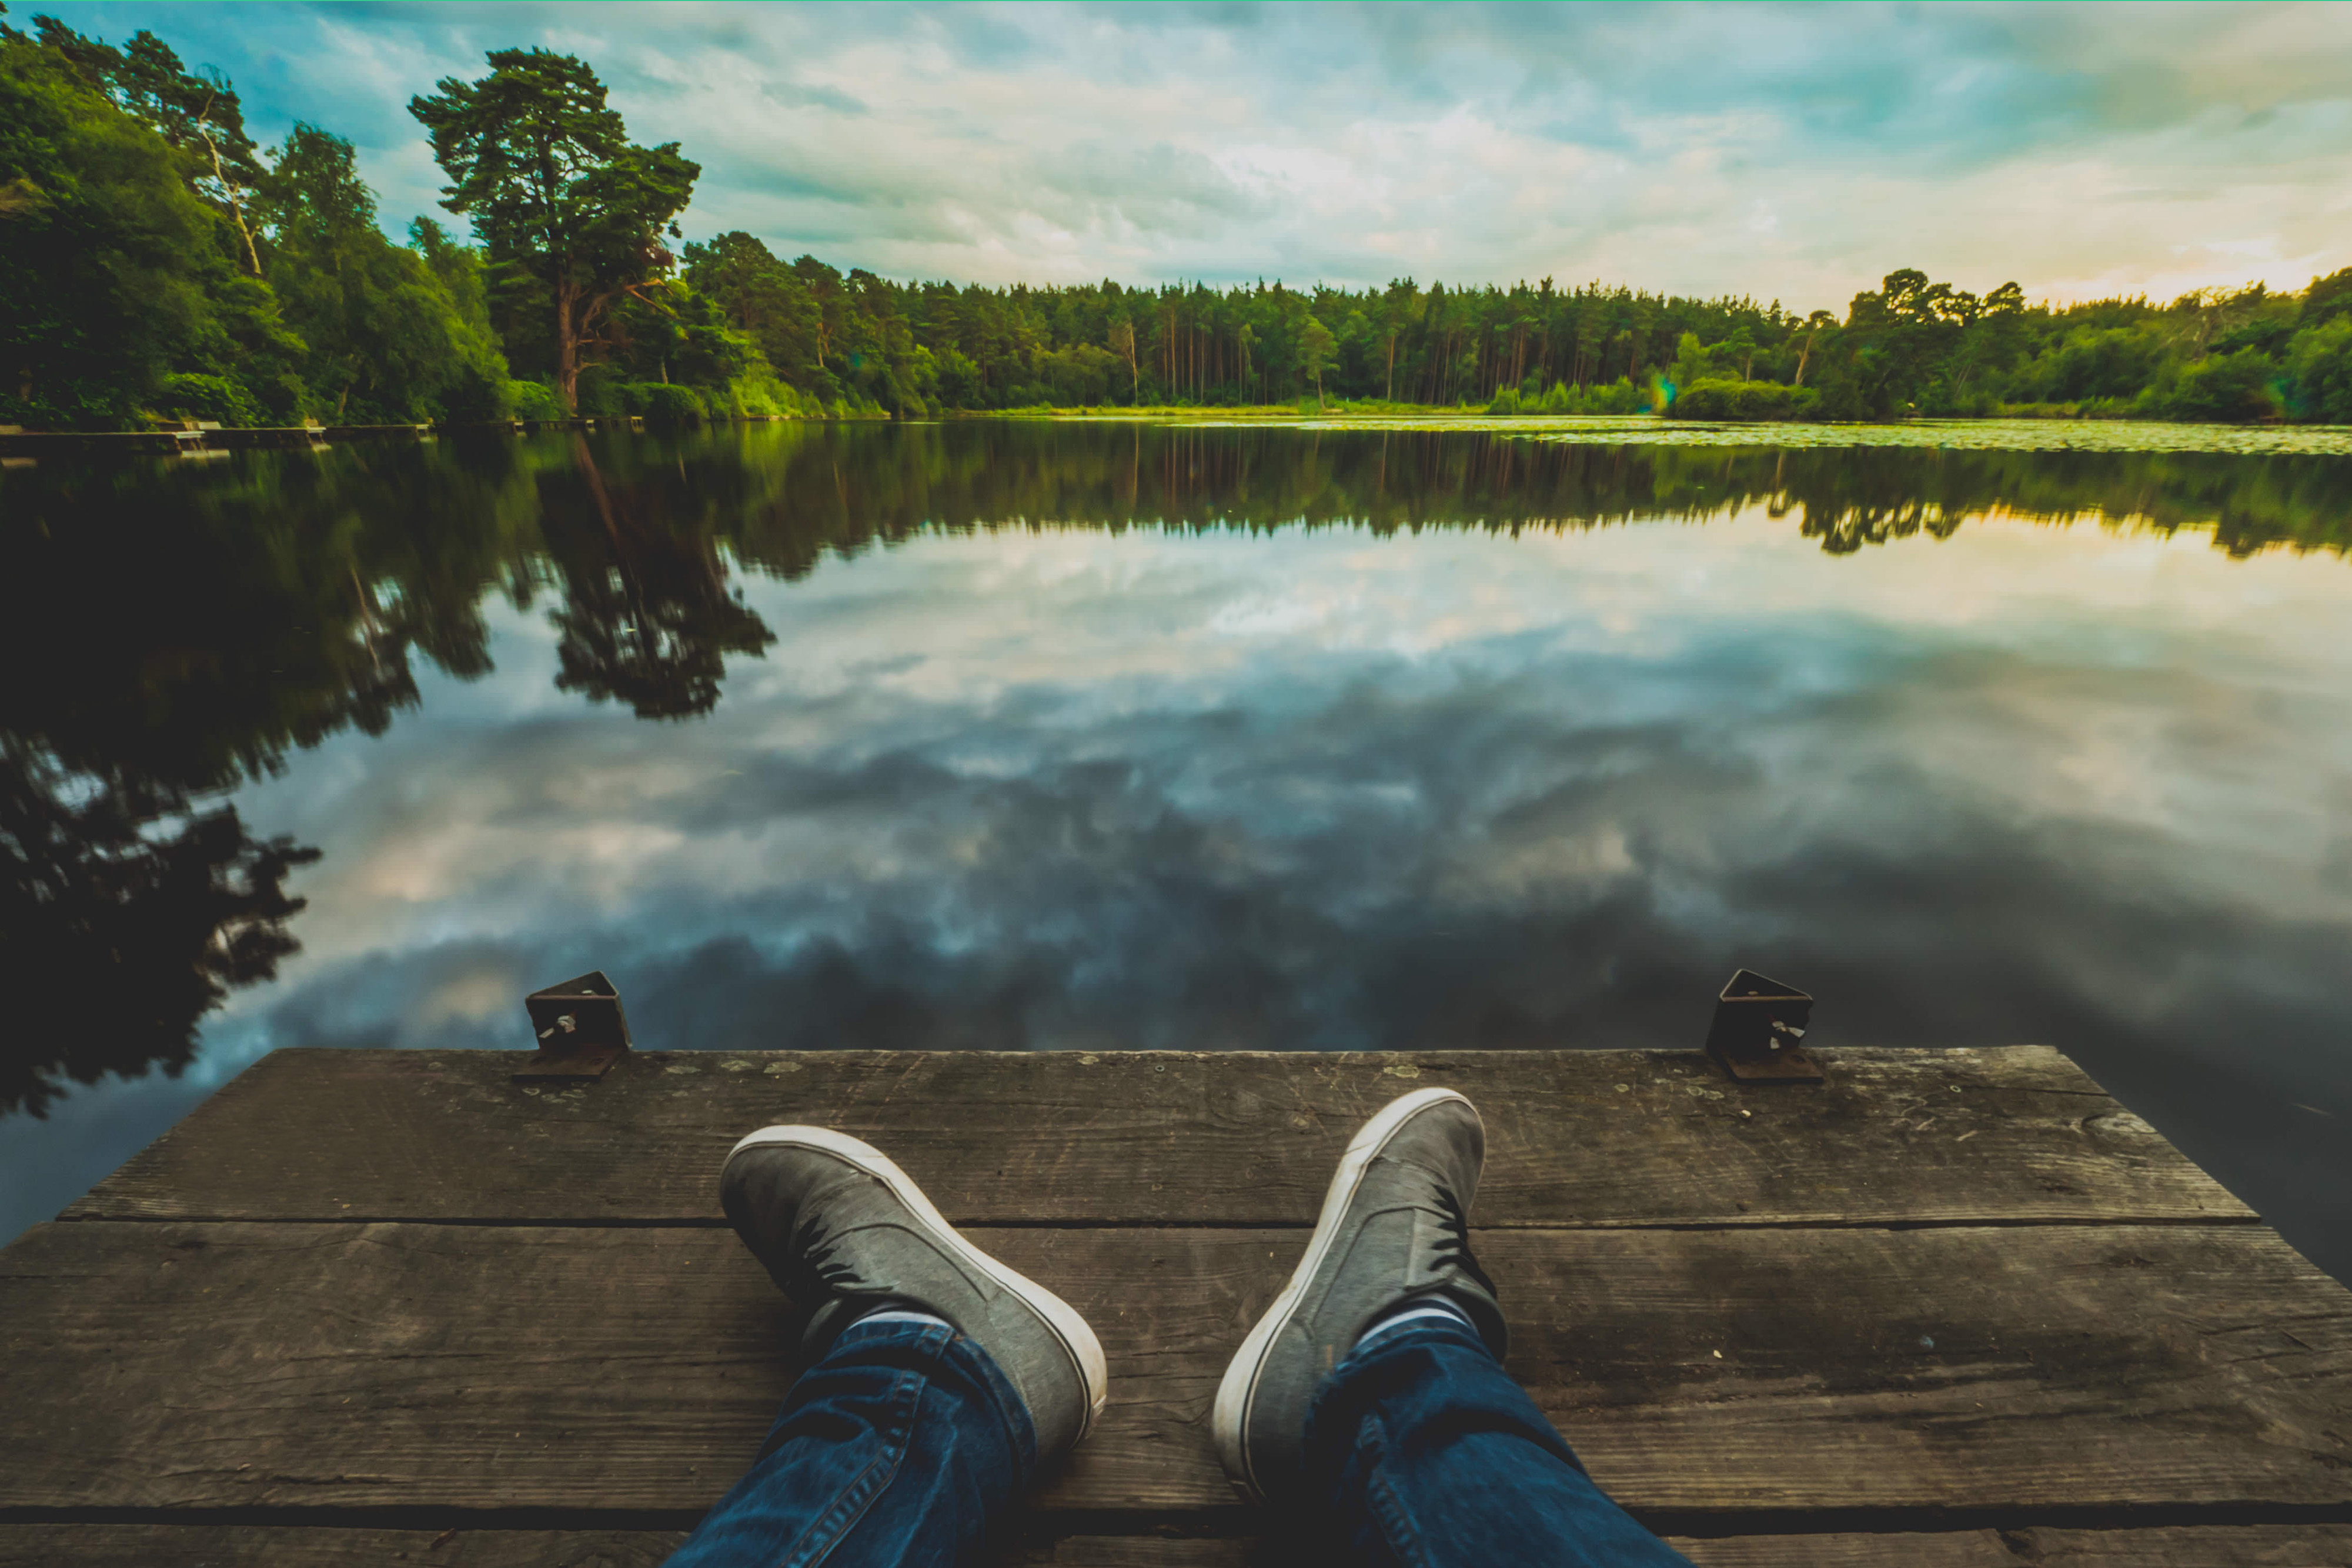 A man sits on a dock by a calm lake surrounded by trees, looking relaxed and peaceful. The image conveys a sense of serenity and introspection. This image may be relevant to Cognitive Behavioral Therapy in Connecticut, as CBT often involves mindfulness exercises and relaxation techniques to manage symptoms.